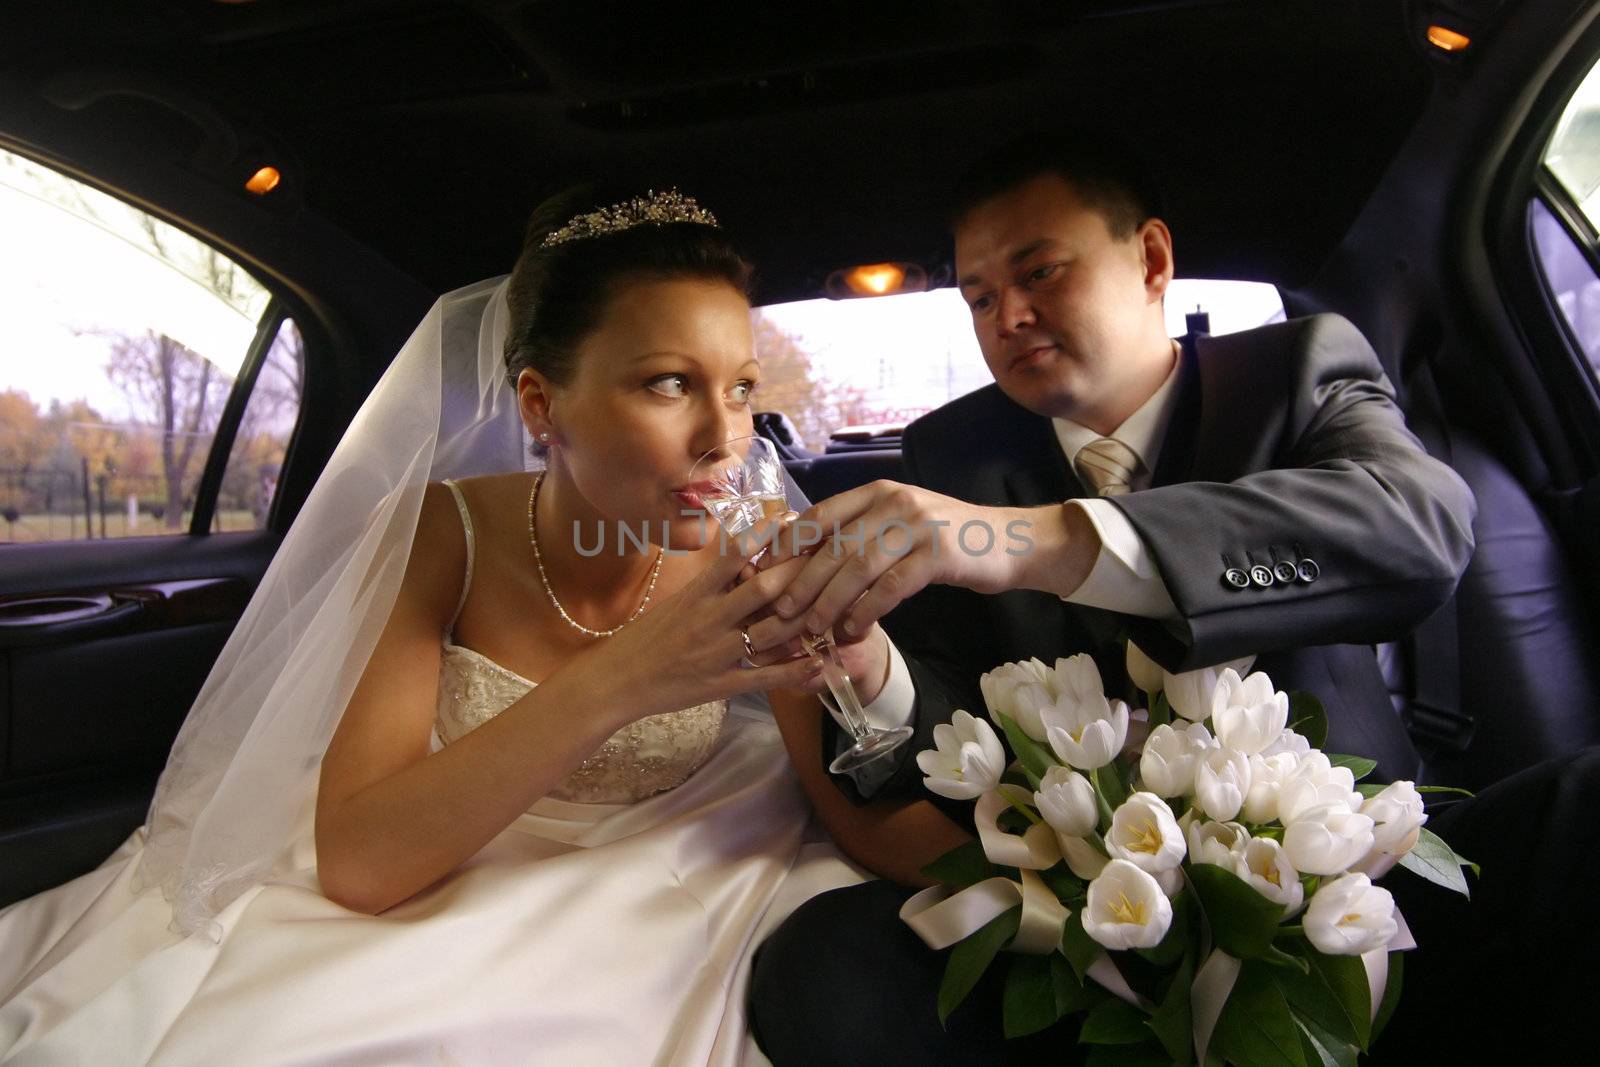 The bride with the groom drinks champagne in the automobile